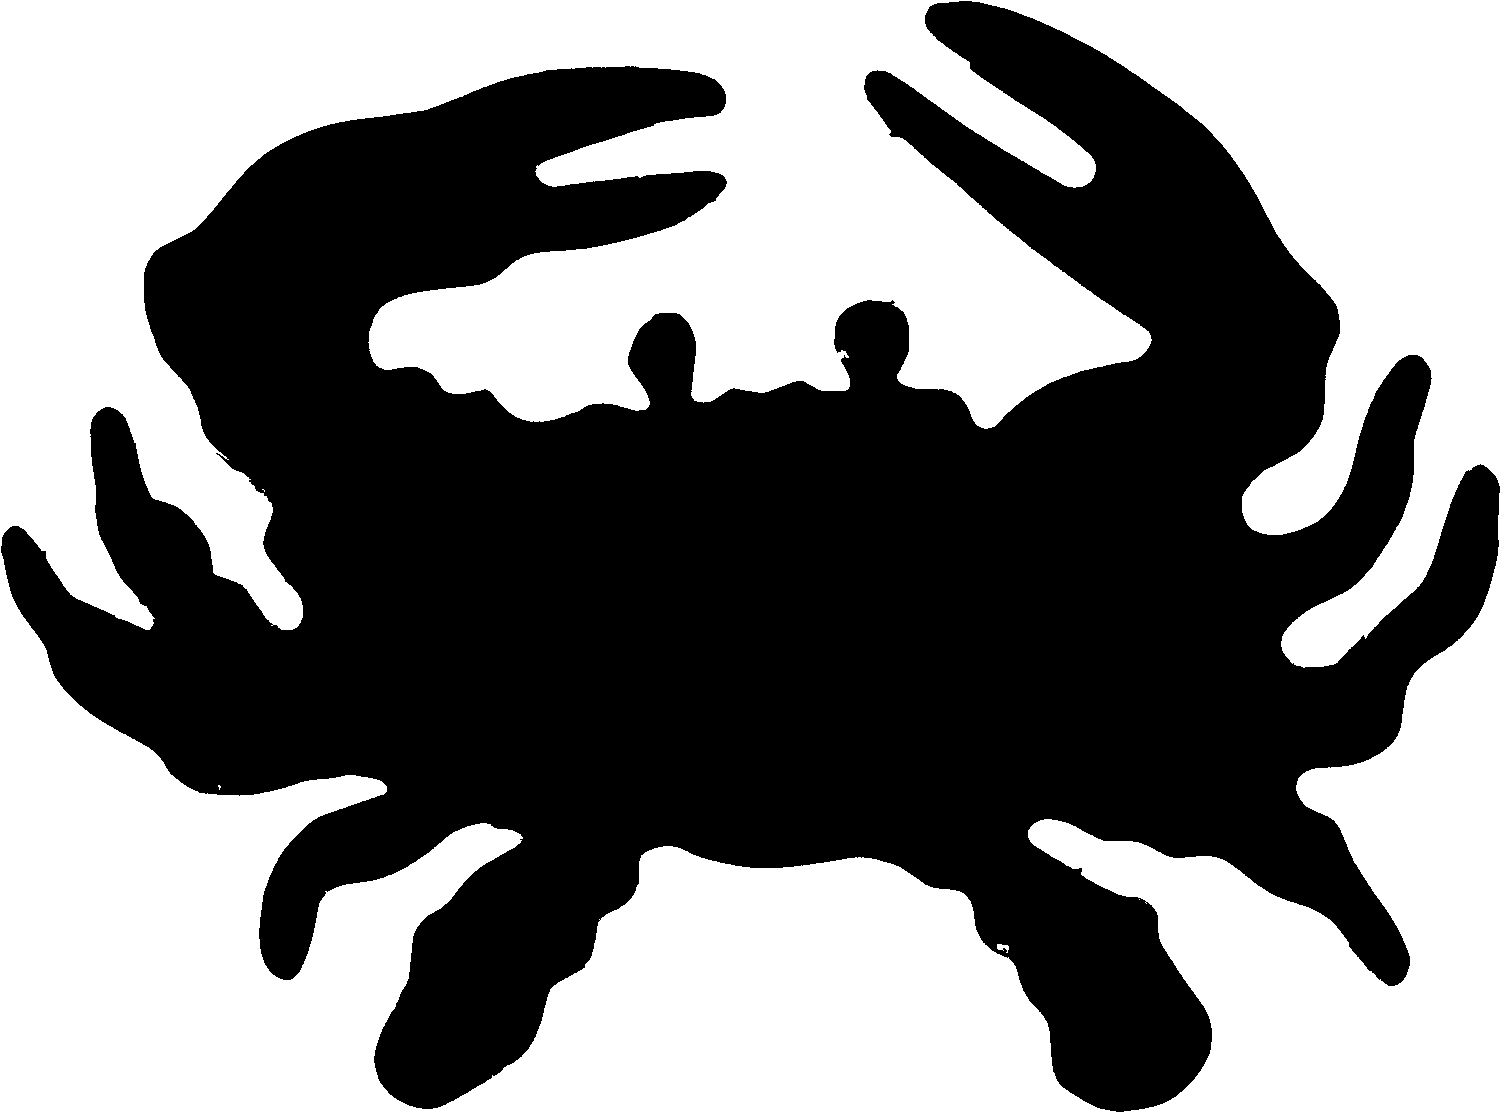 Crabs silhouette